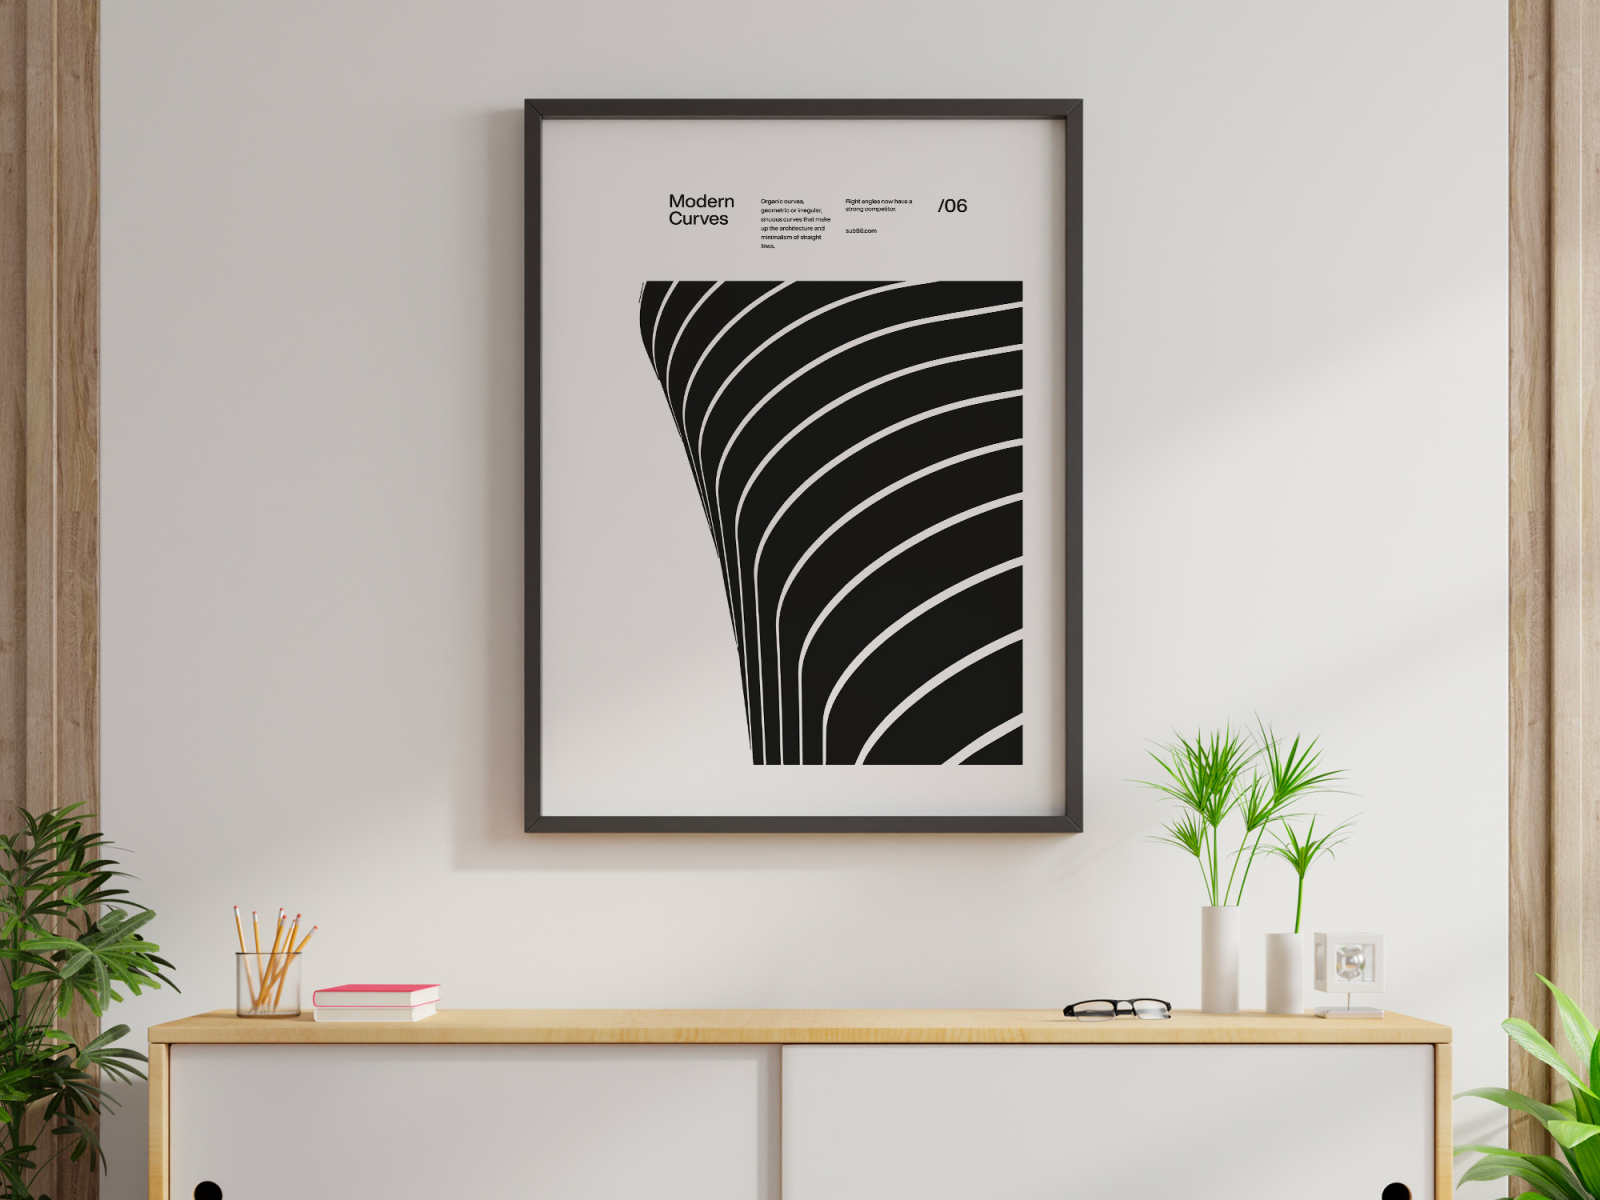 Modern Curves 06, Modern Architecture Design Poster by Sub88 on Dribbble